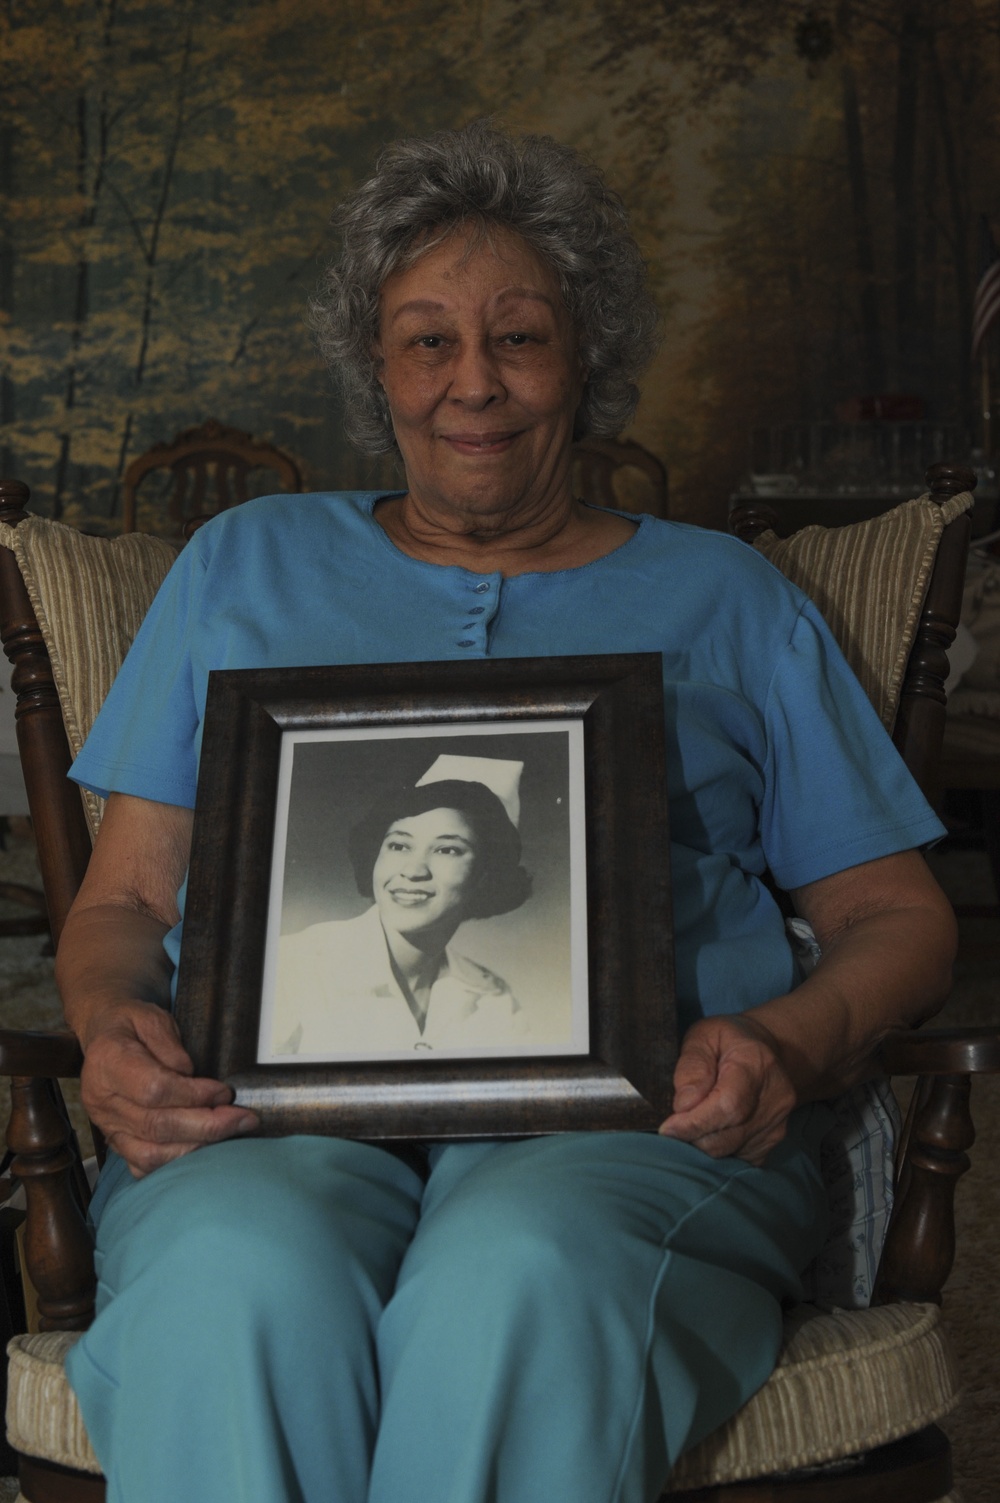 Reservist recalls early days as African-American female Airman